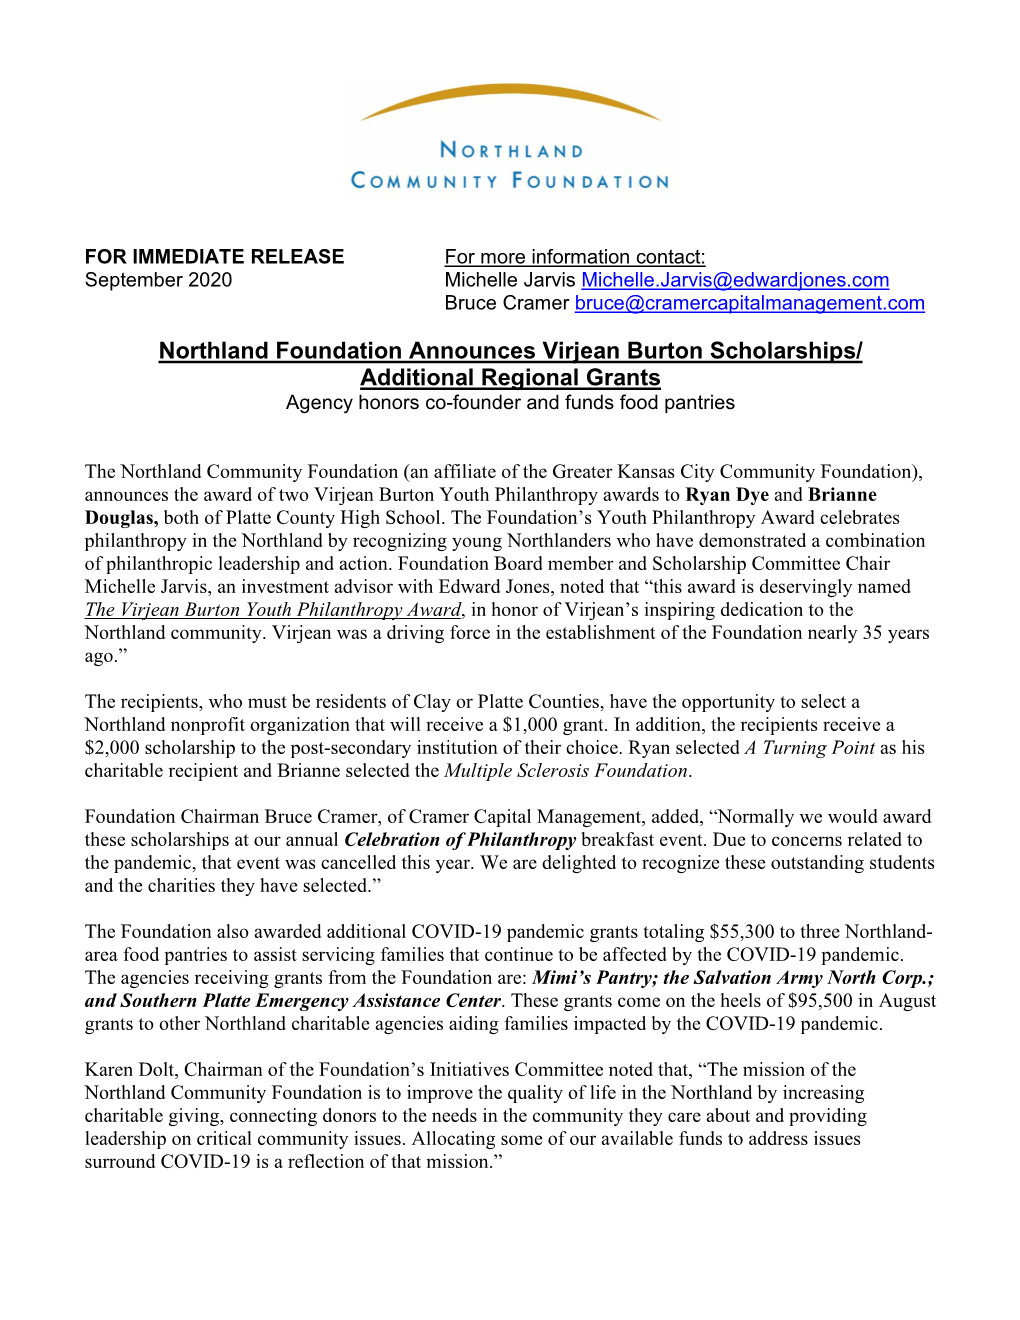 Northland Foundation Announces Virjean Burton Scholarships/ Additional Regional Grants Agency Honors Co-Founder and Funds Food Pantries